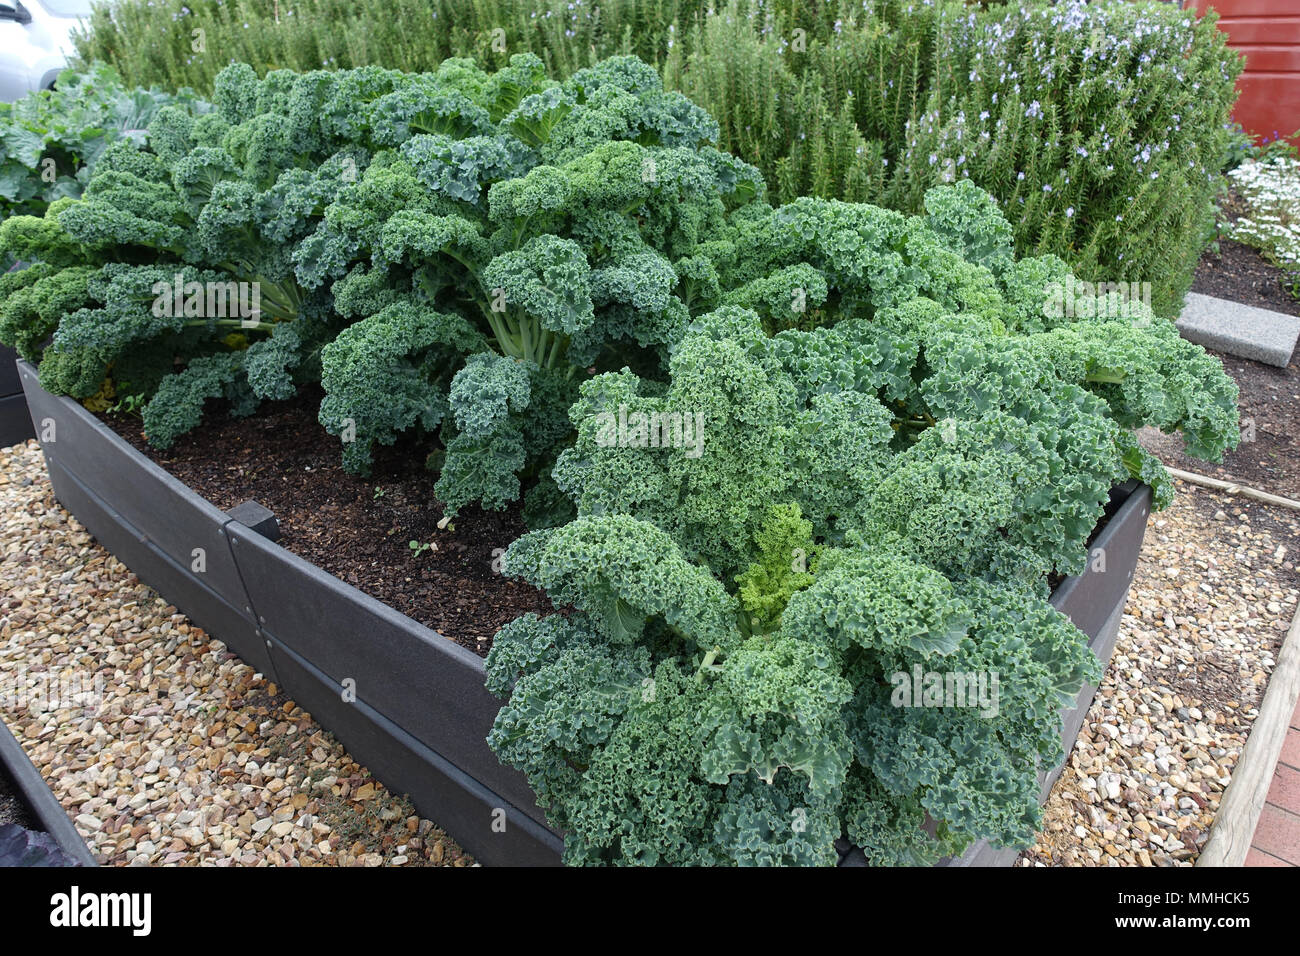 Growing Brassica oleracea or known as Dwarf Blue Scotch Kale on a vegetable patch Stock Photo